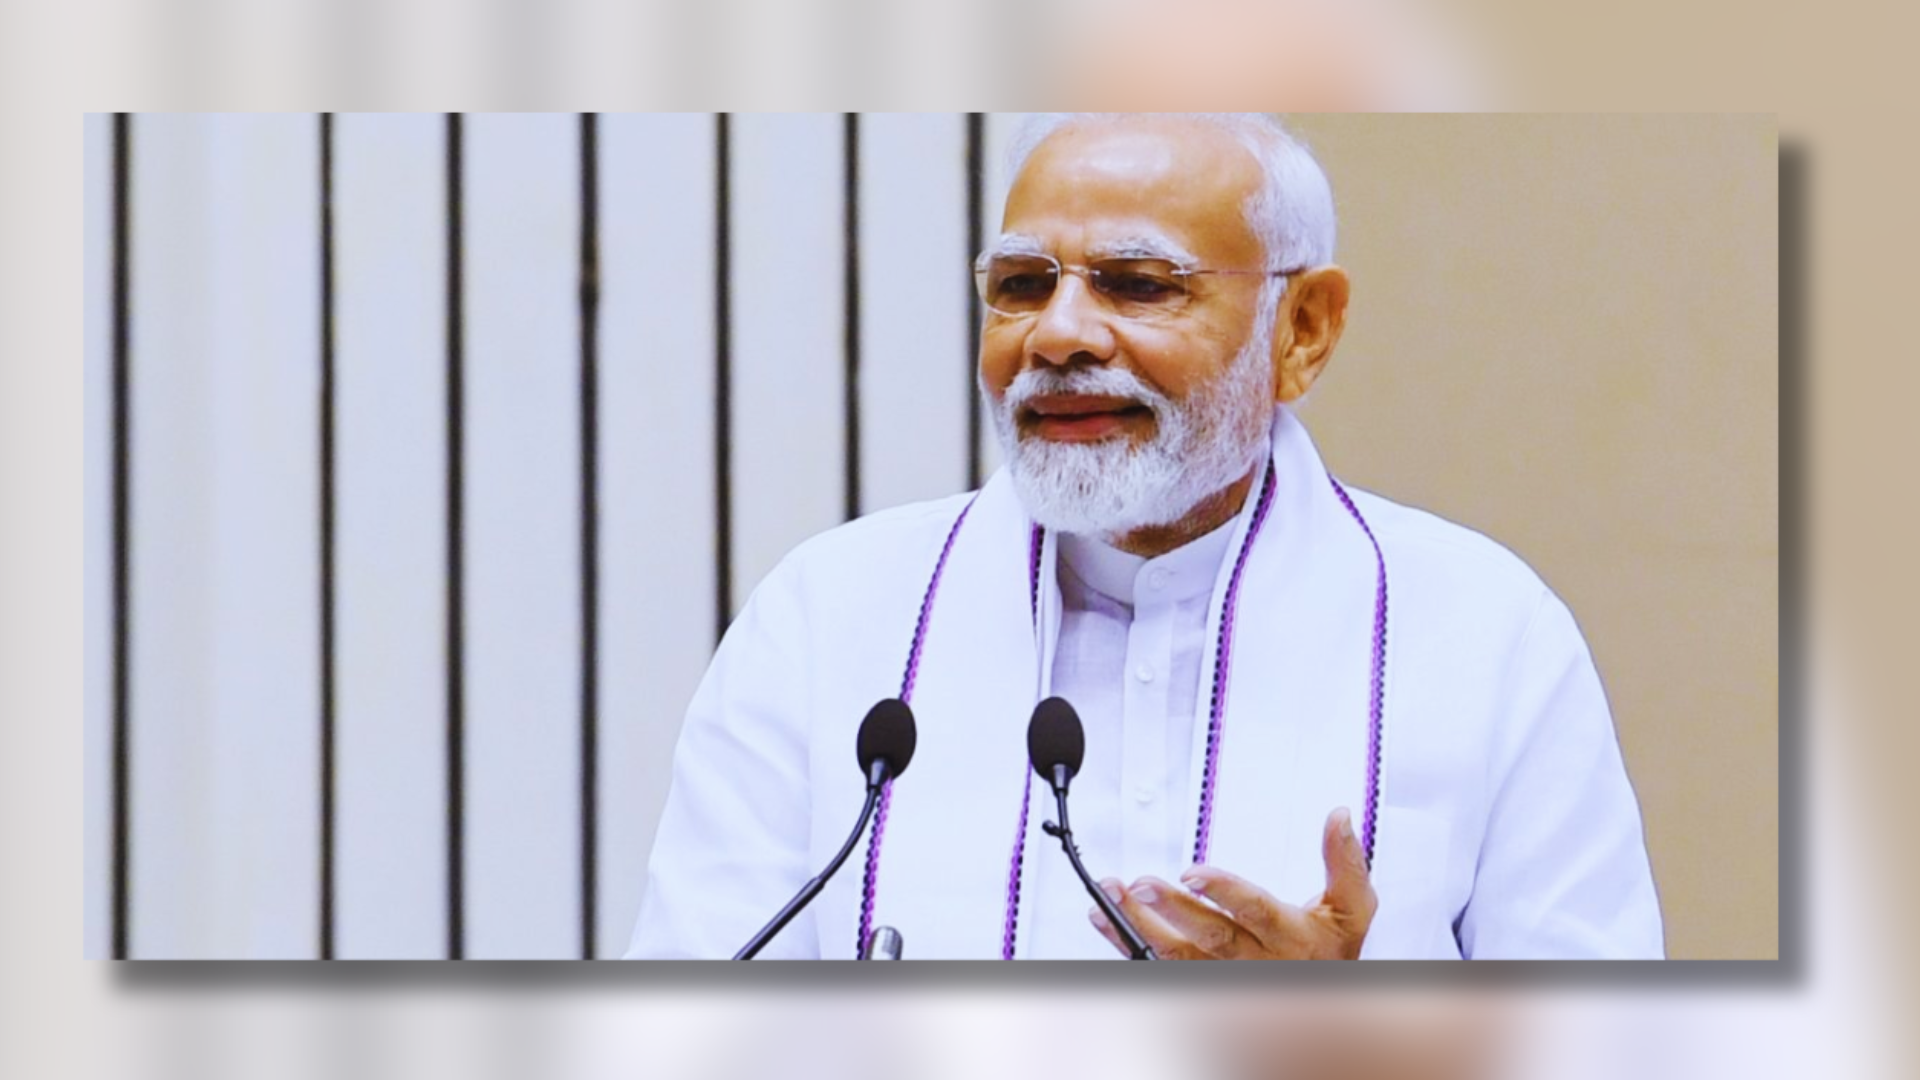 PM’s Identity Exploited : Delhi High Court Upholds FIR Against Individual Allegedly Exploiting PM Modi’s Identity For Fundraising